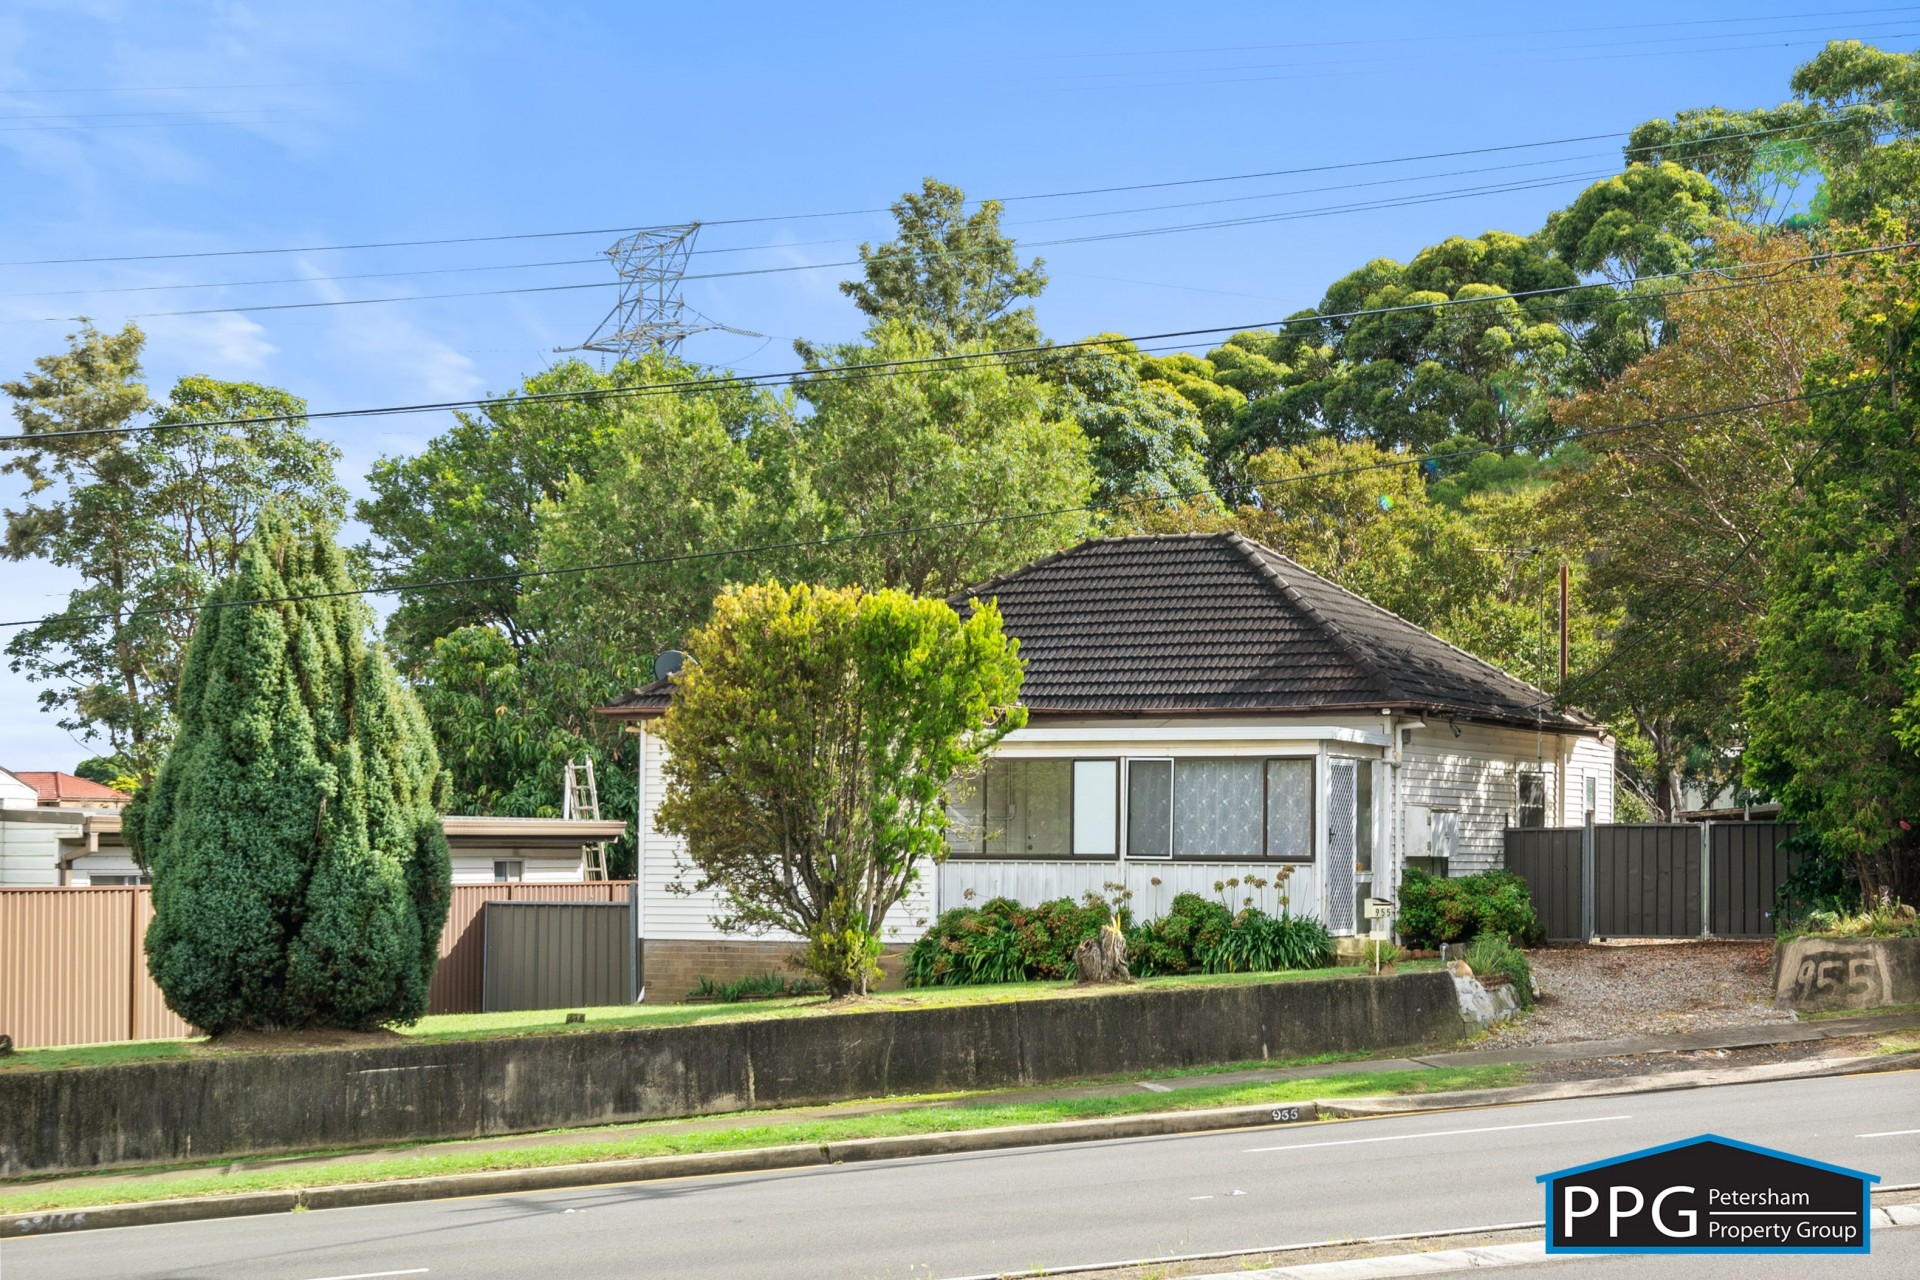 Property For Sale in Padstow Heights